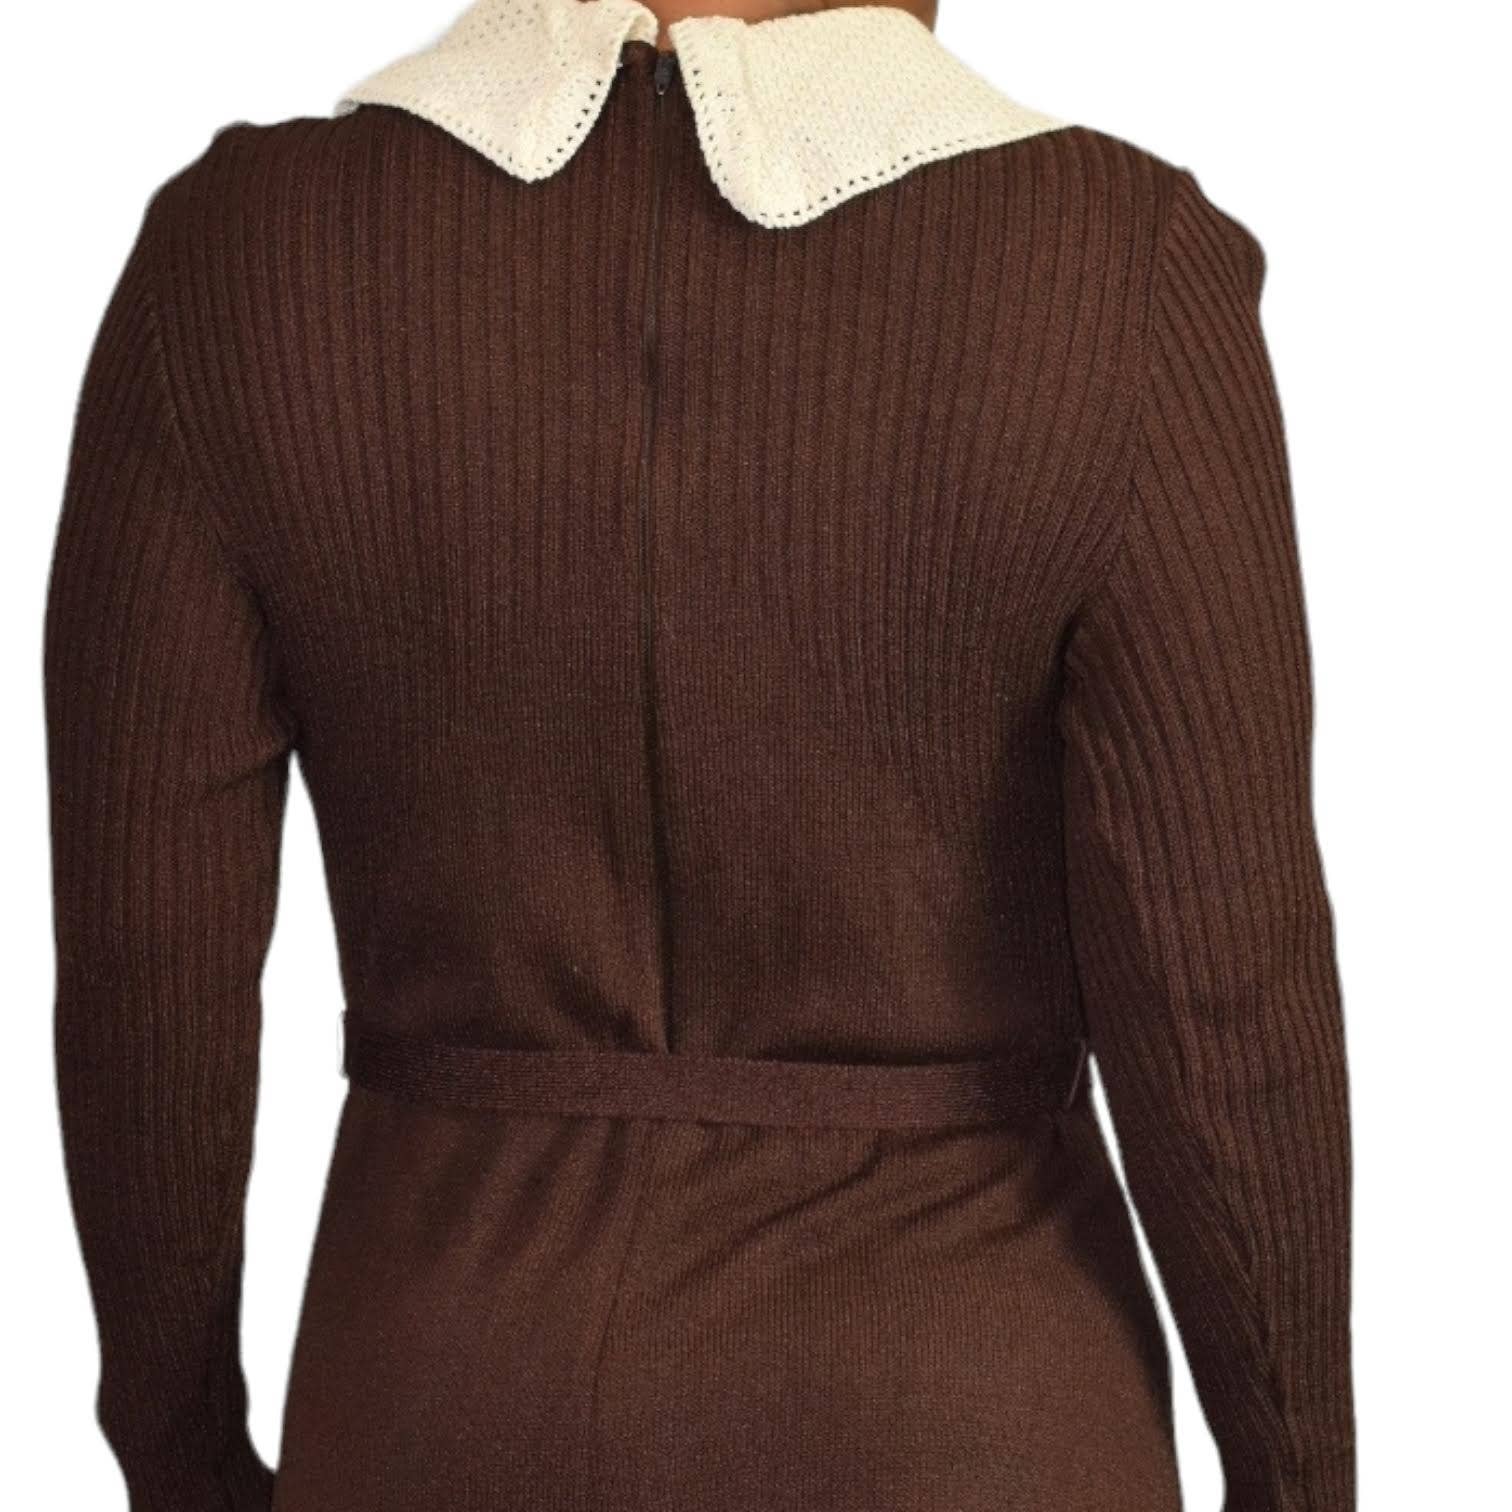 Vintage Ribbed Knit Dress 70s Brown Belted Stretch Contrast Collar Size Medium